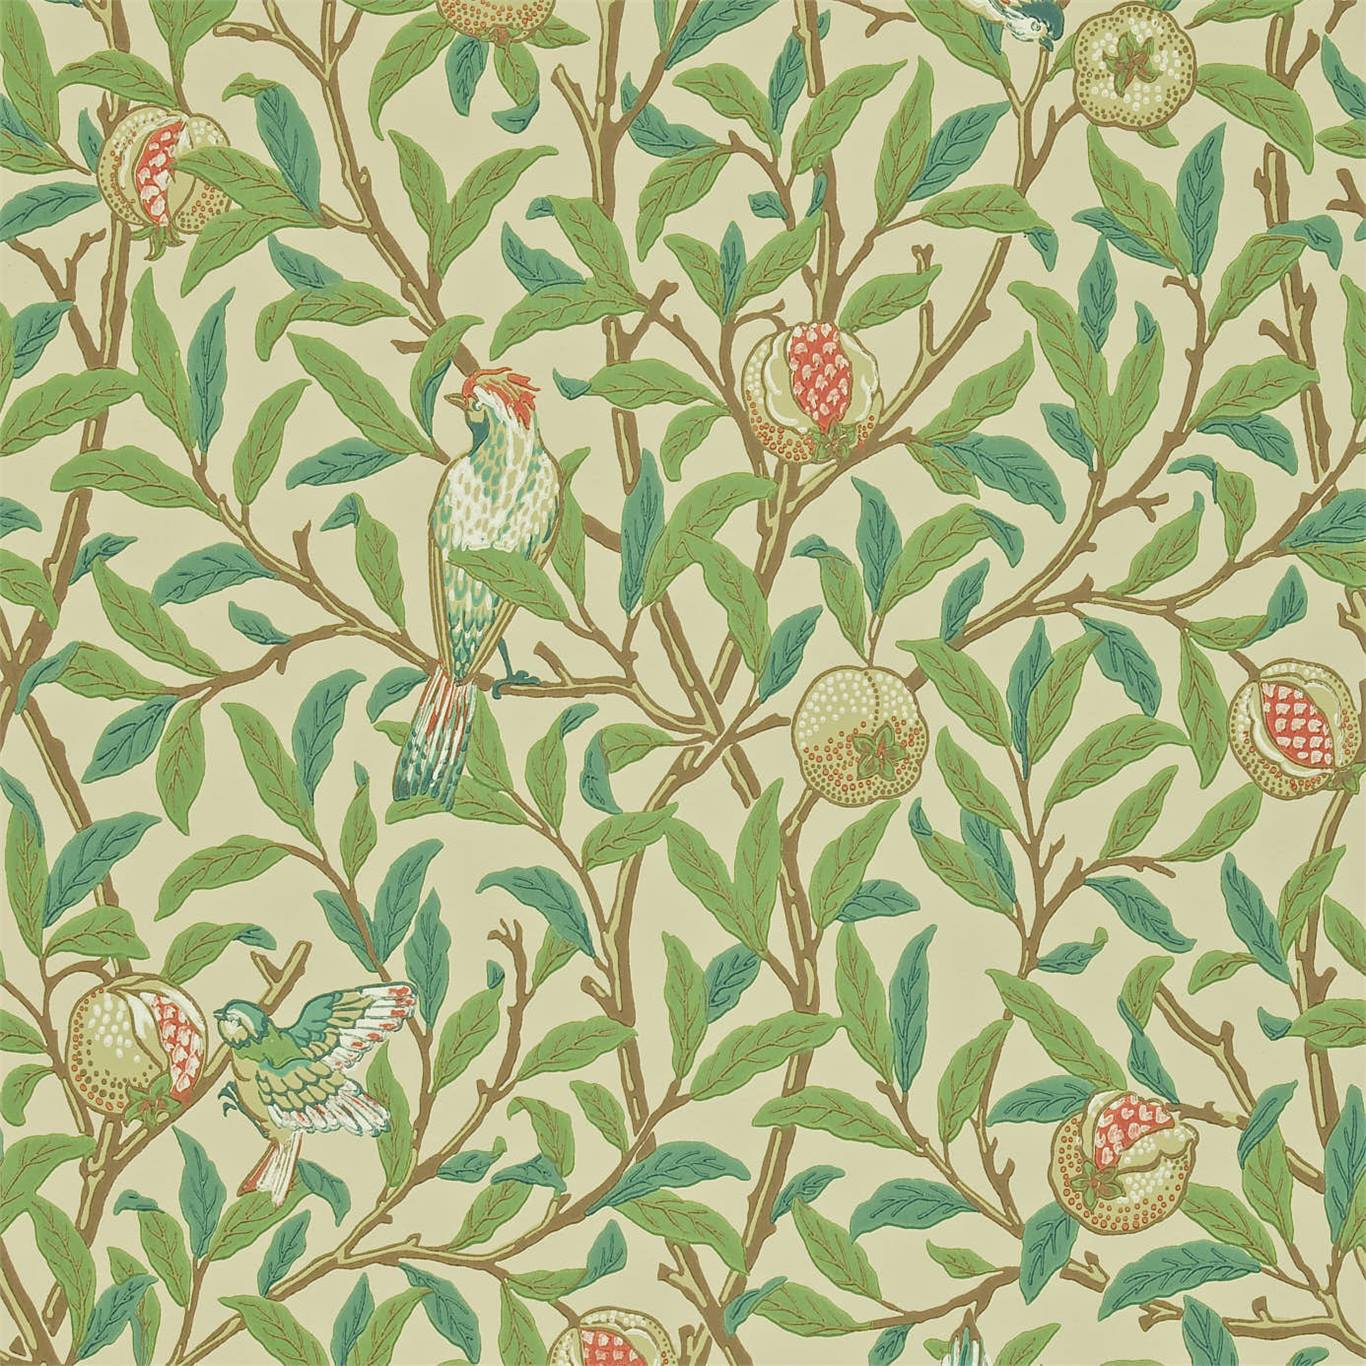 William Morris Bird And Pomegranate Wallpaper DCMW216841 by Morris & Co